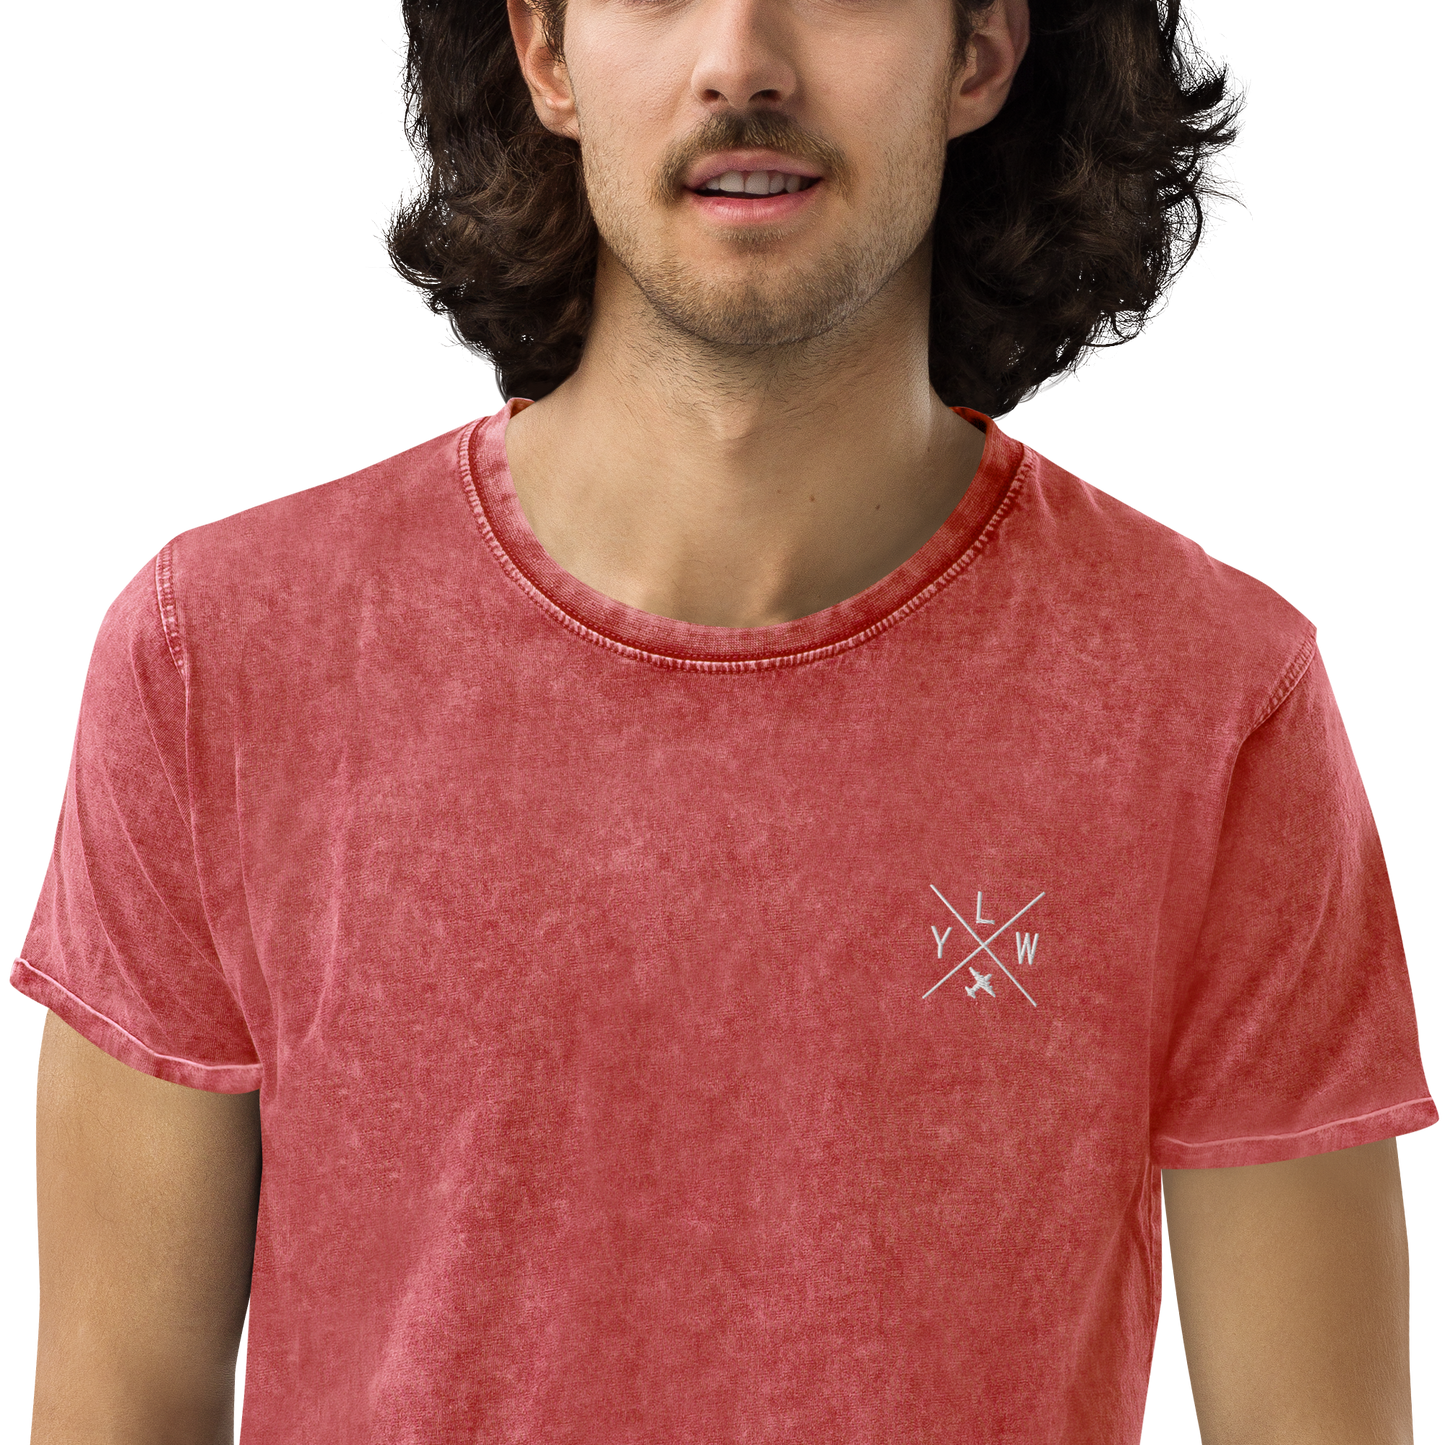 YHM Designs - YLW Kelowna Denim T-Shirt - Crossed-X Design with Airport Code and Vintage Propliner - White Embroidery - Image 09